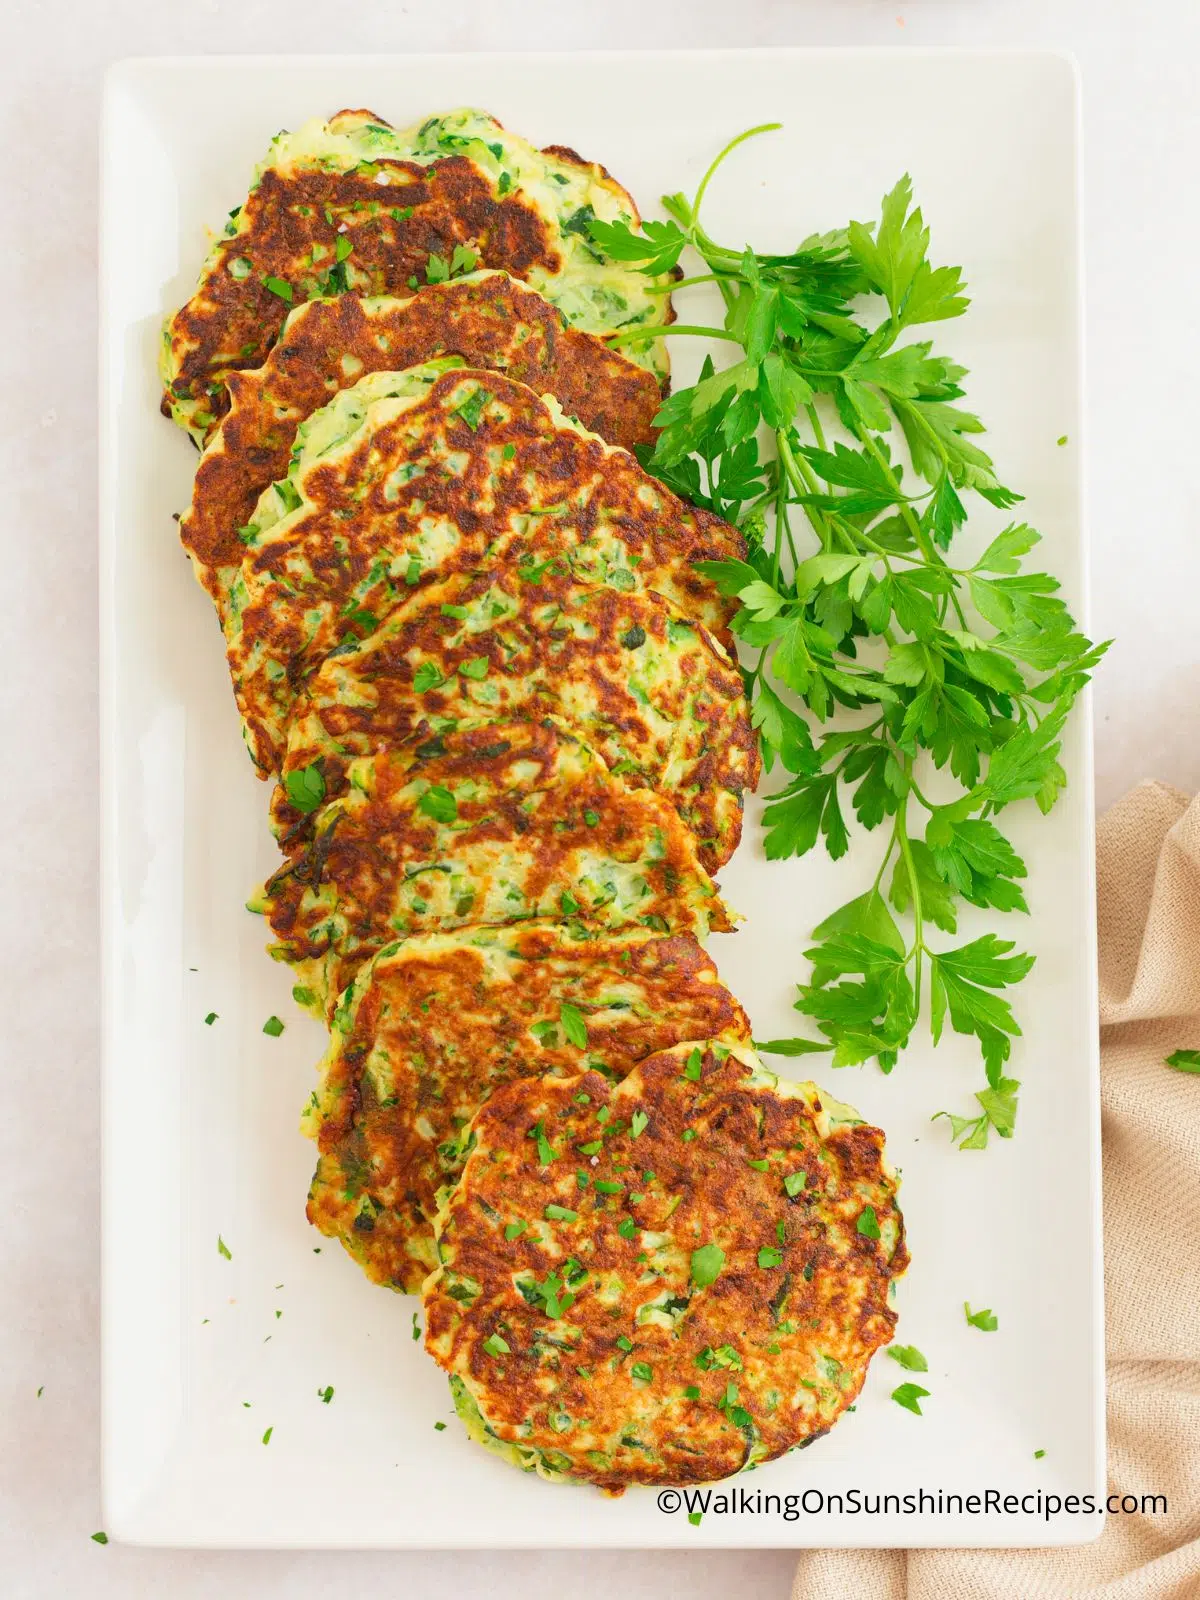 Zucchini fritters on white plate with fresh parsley as garnish.